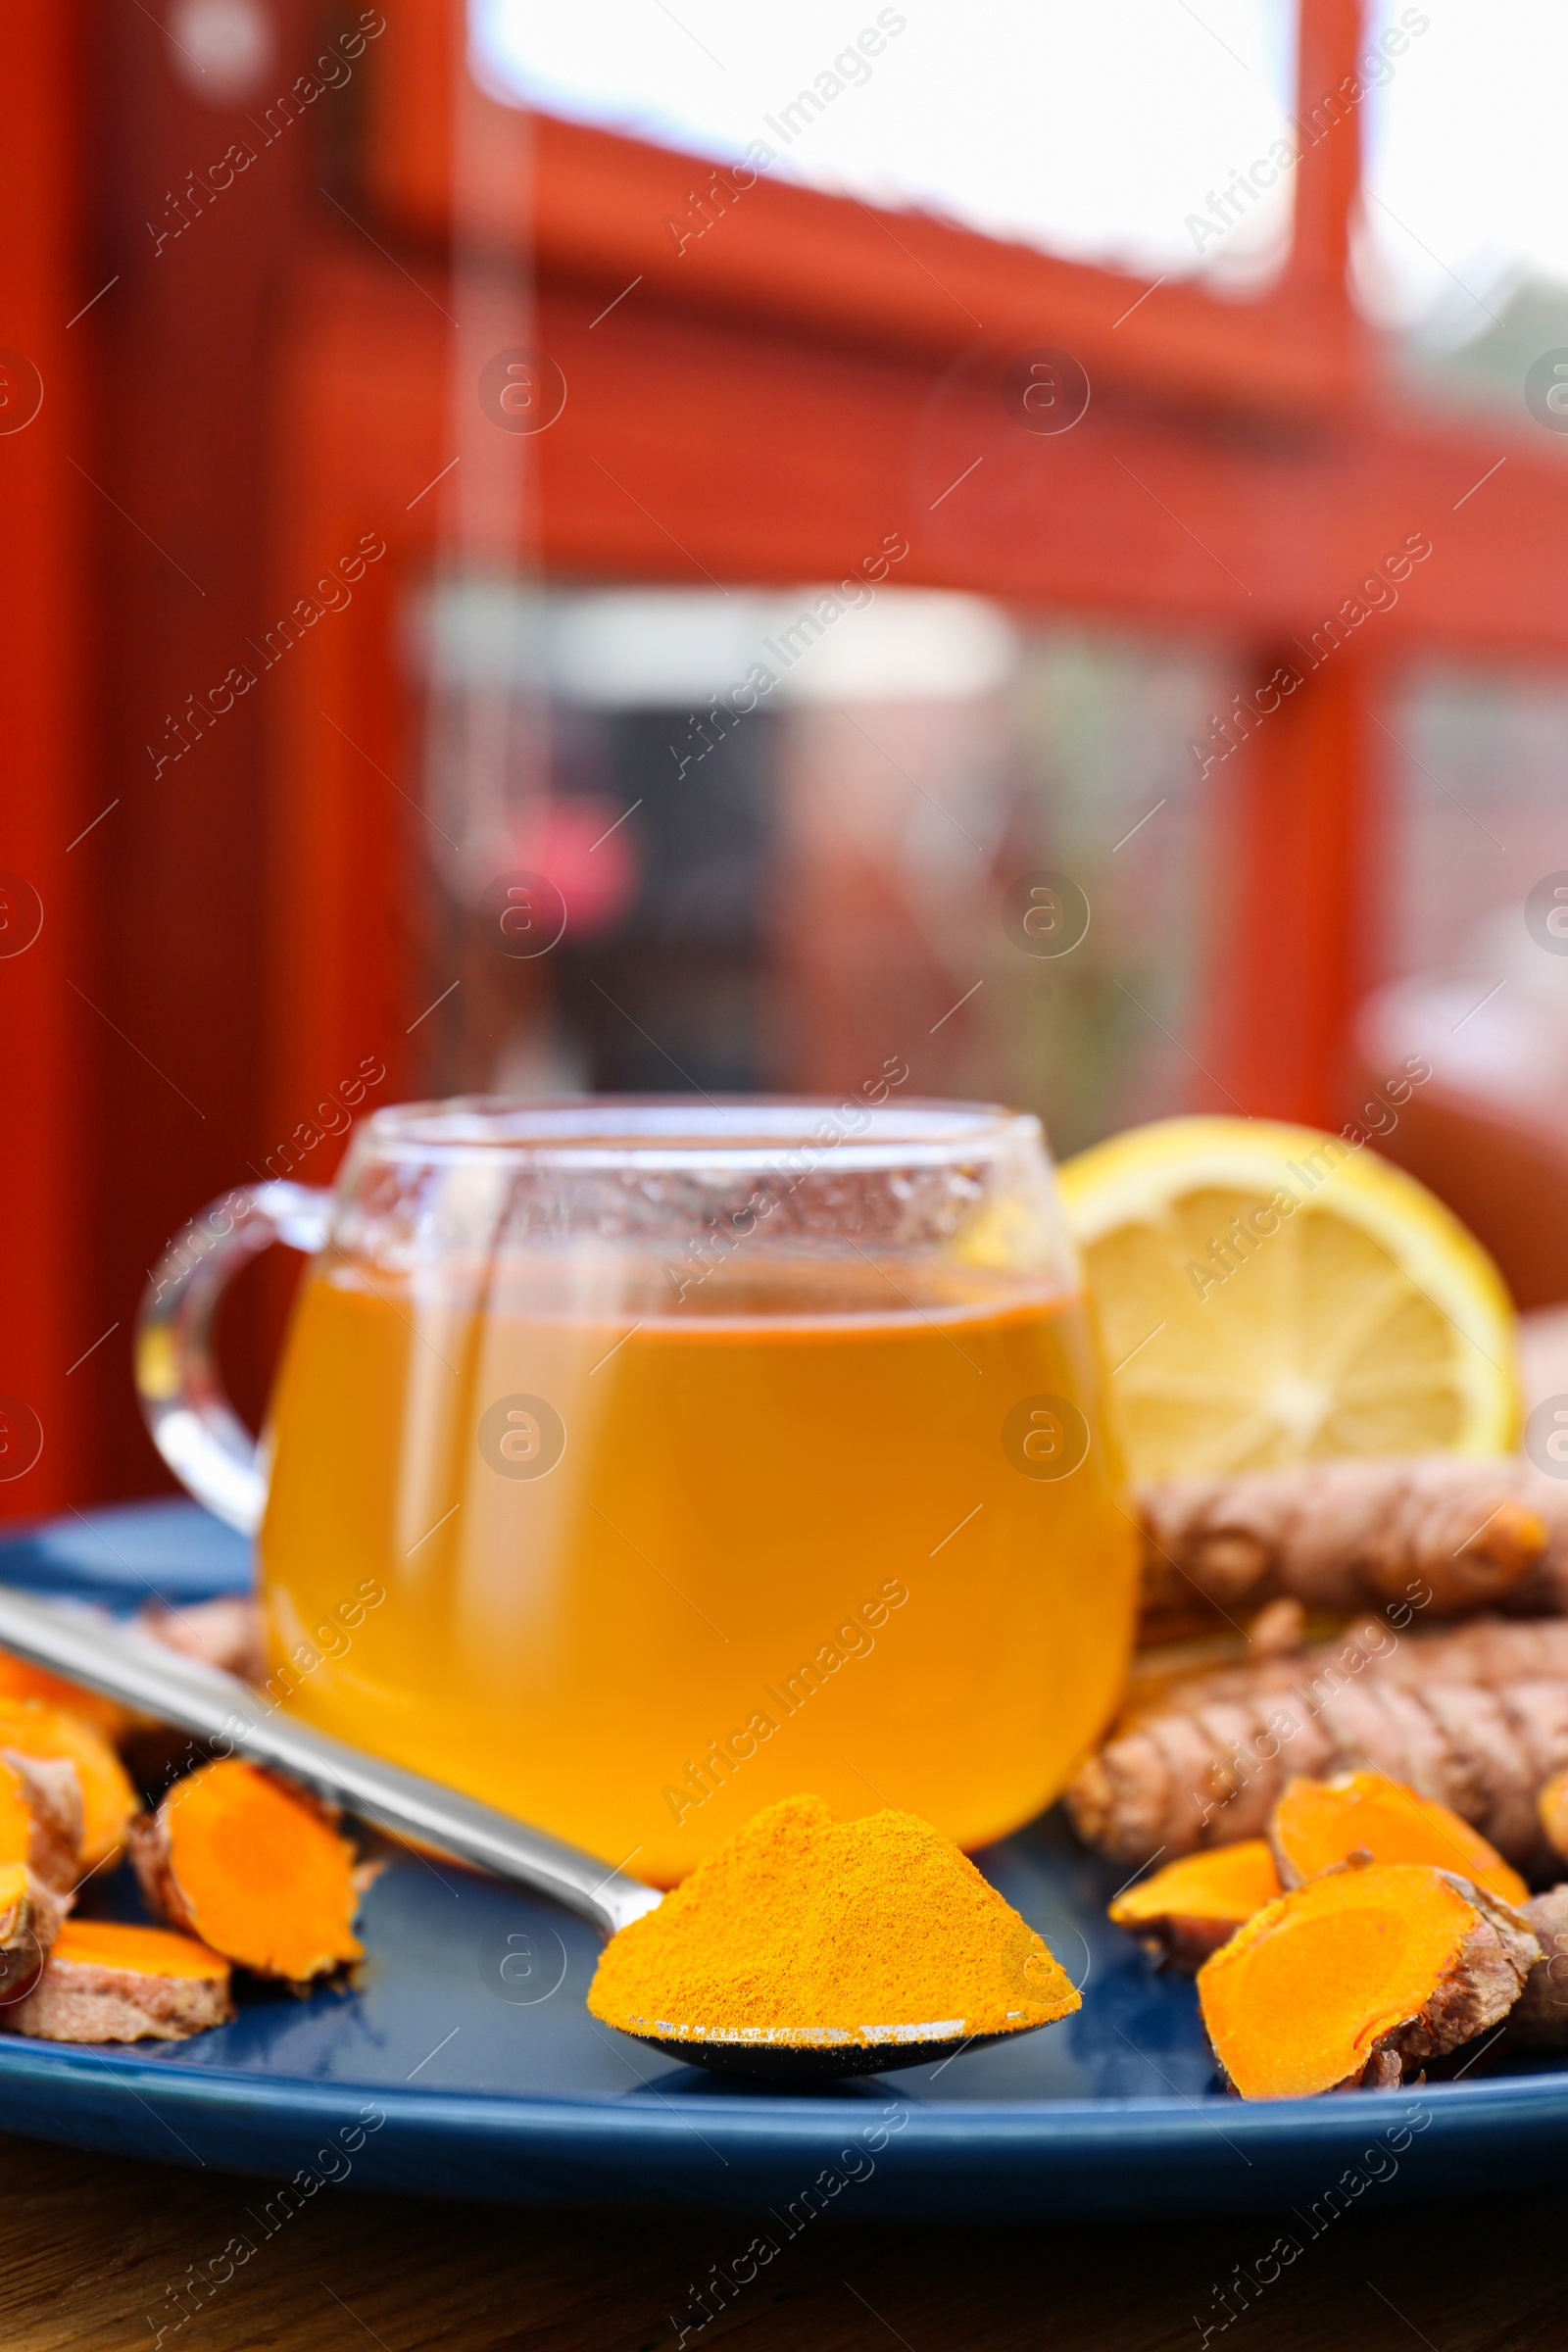 Photo of Plate with glass cup of hot tea, lemon, turmeric powder and roots on table